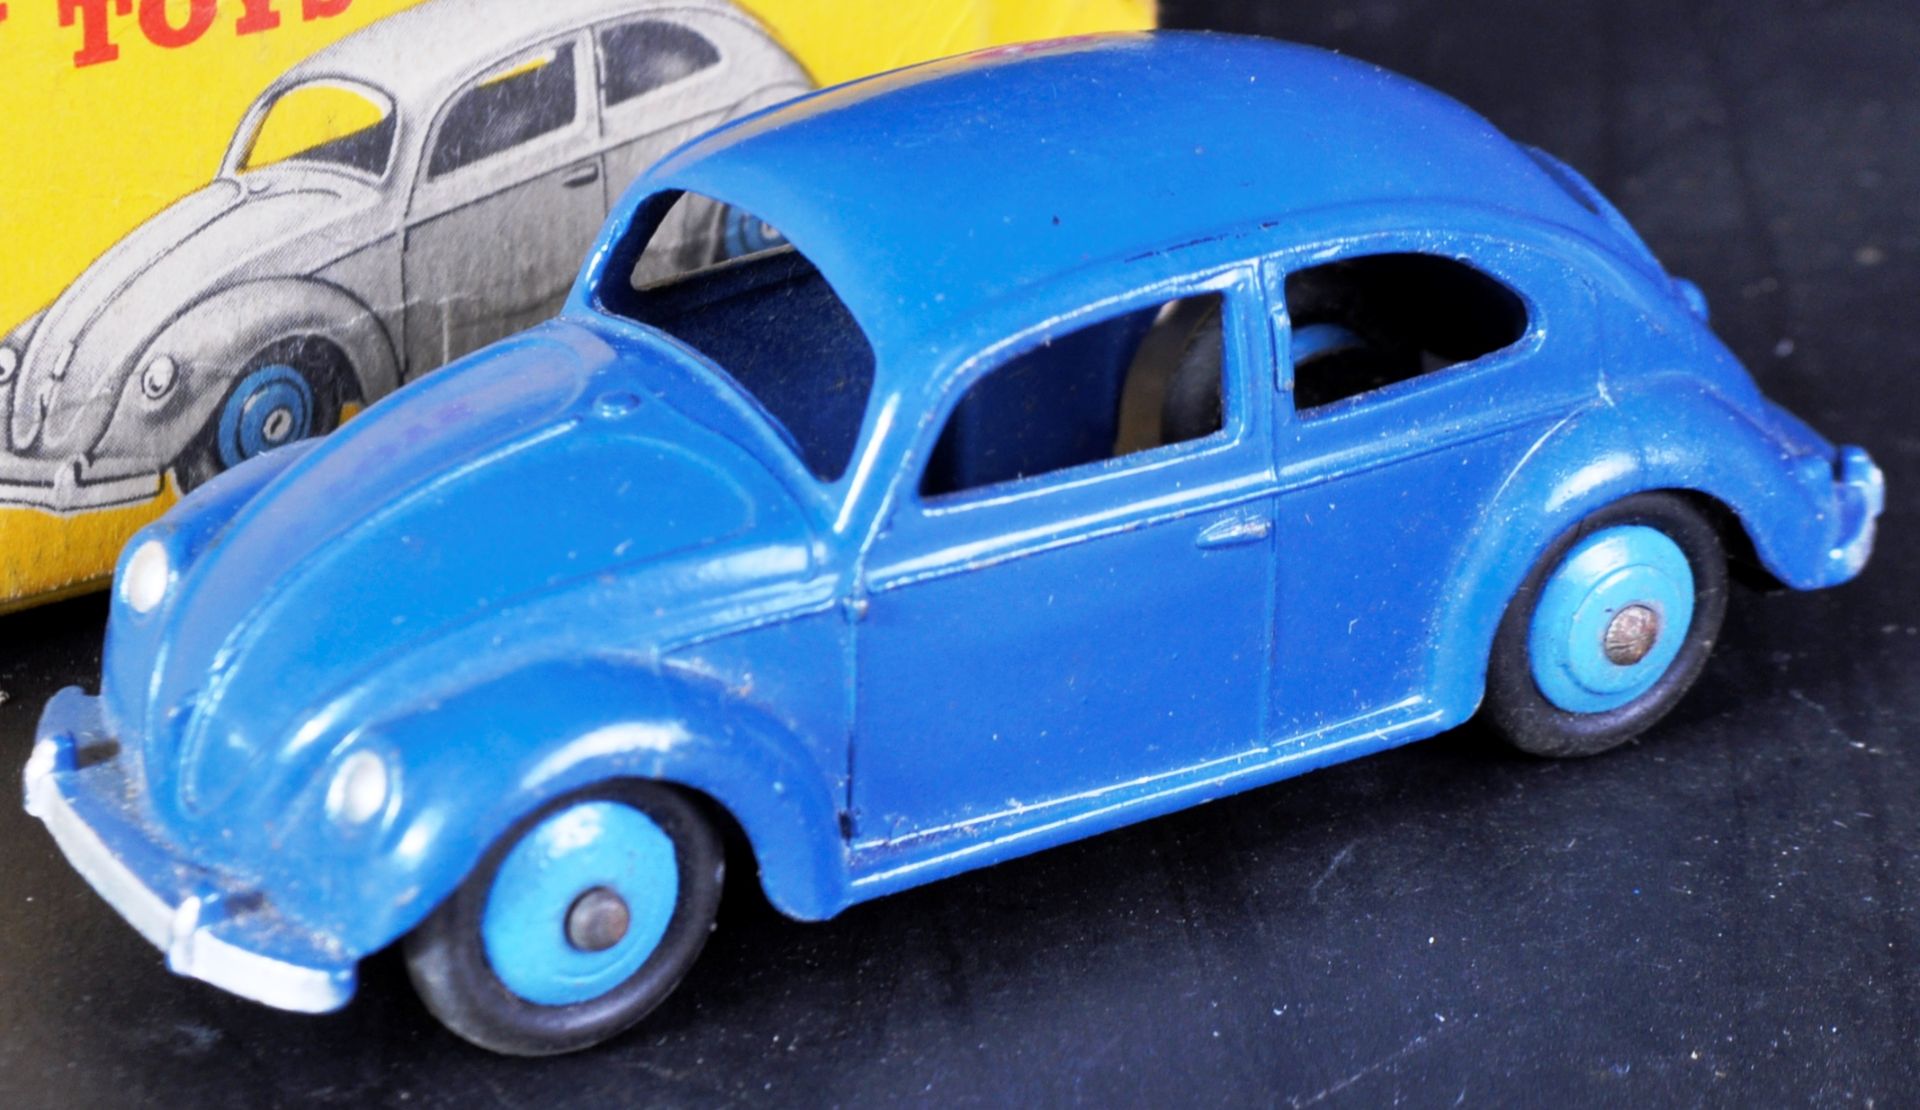 COLLECTION OF VINTAGE DINKY TOYS DIECAST MODEL CARS - Image 6 of 7